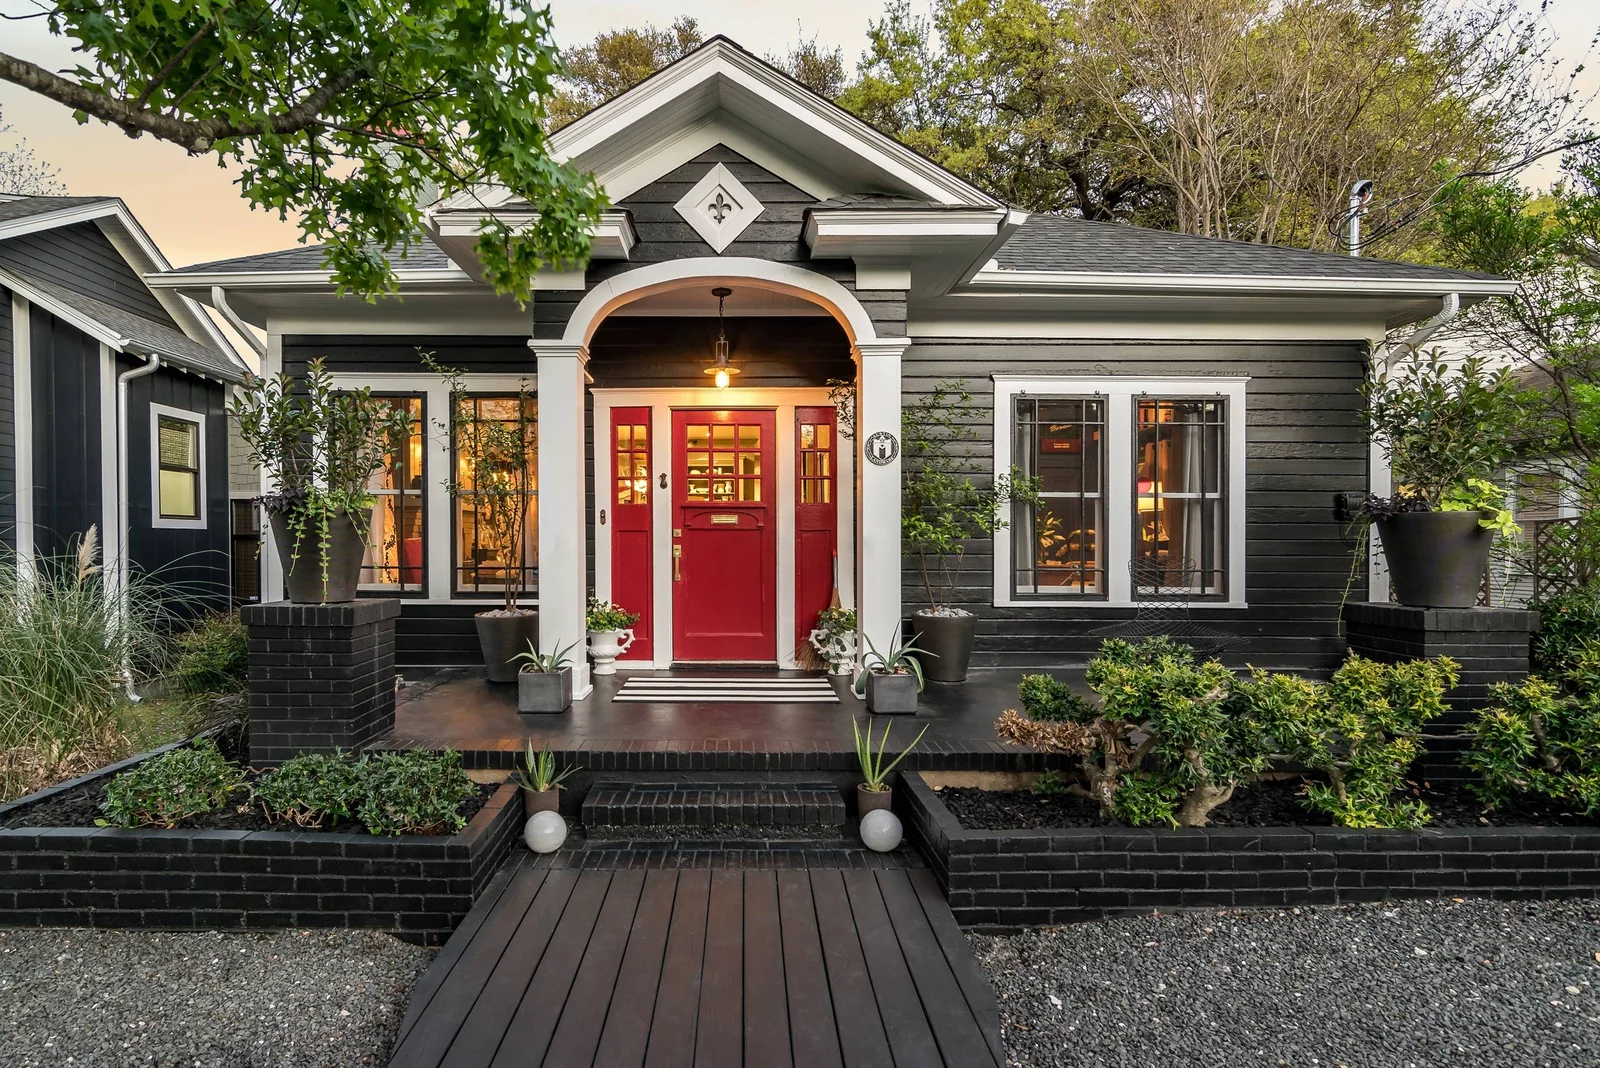 Black House With White Trim